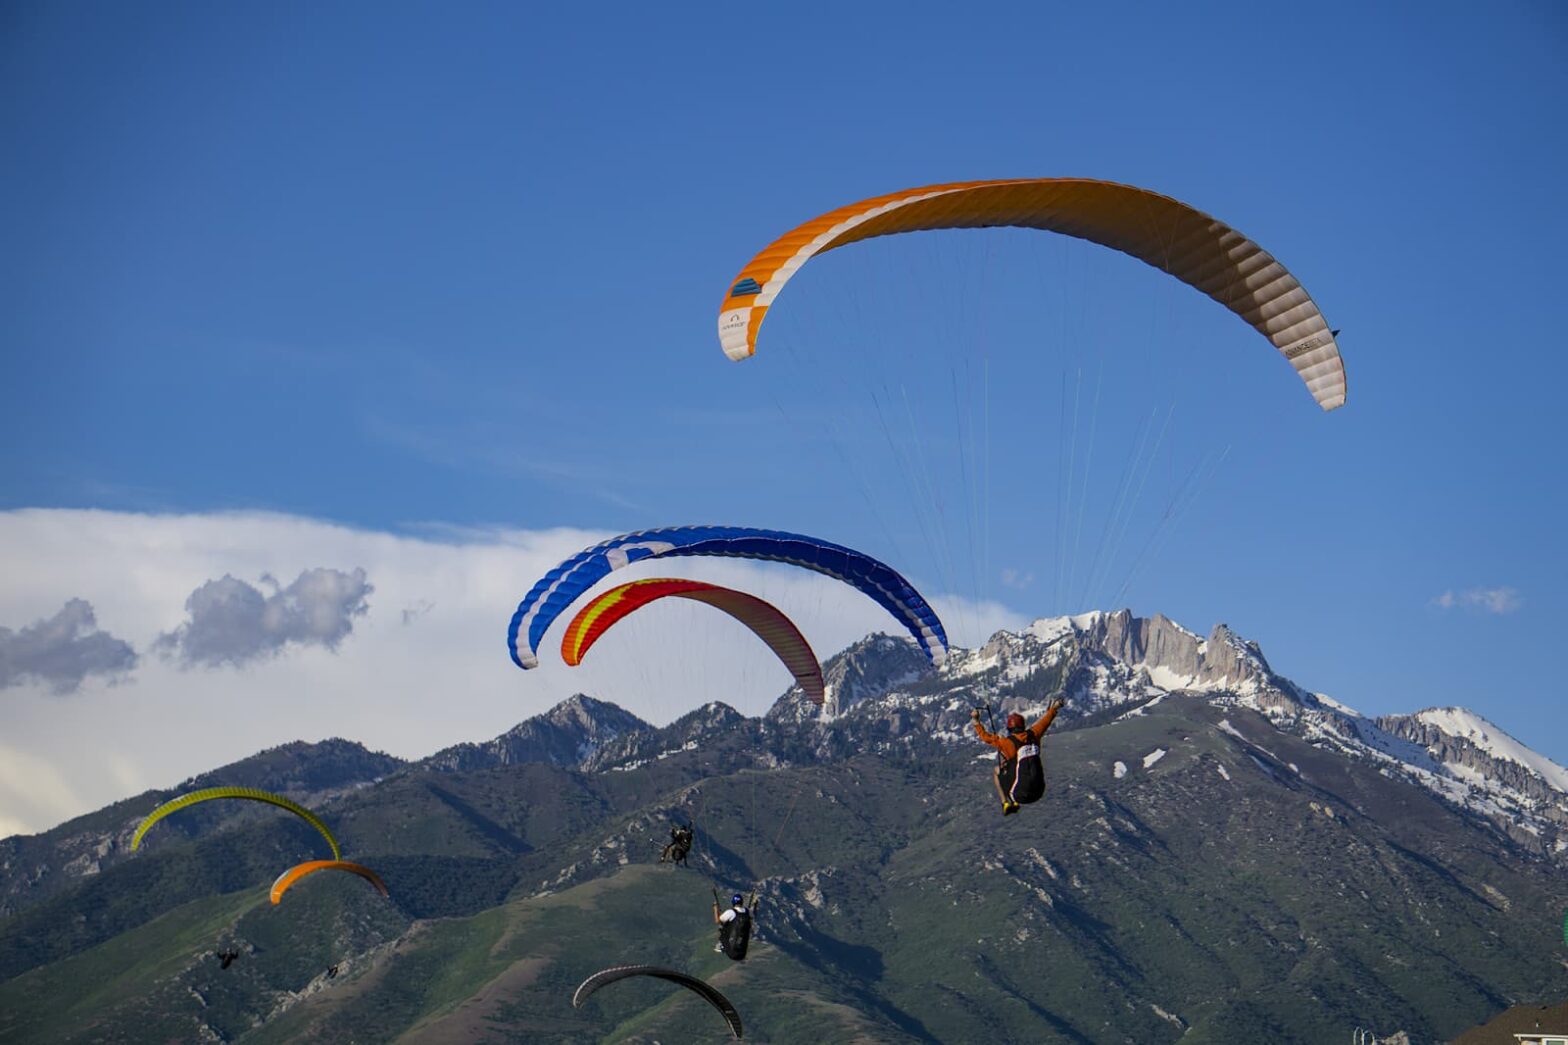 Overview of Hang Gliding in Utah